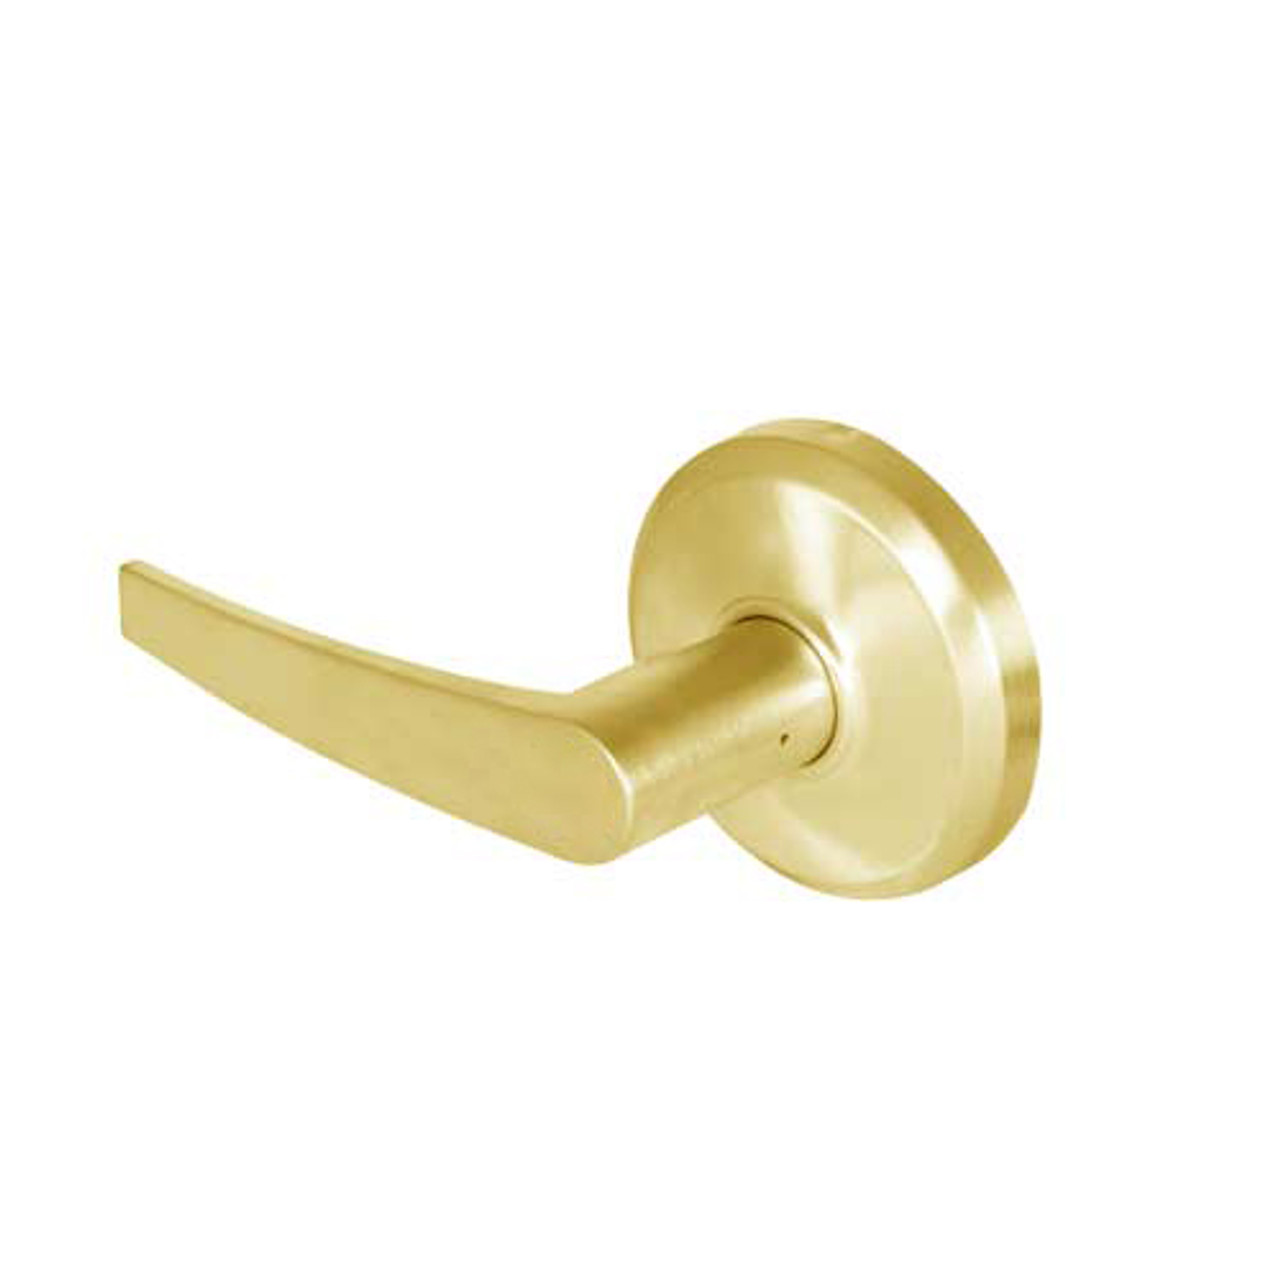 QCL240A605S8FLR Stanley QCL200 Series Cylindrical Privacy Lock with Slate Lever in Bright Brass Finish